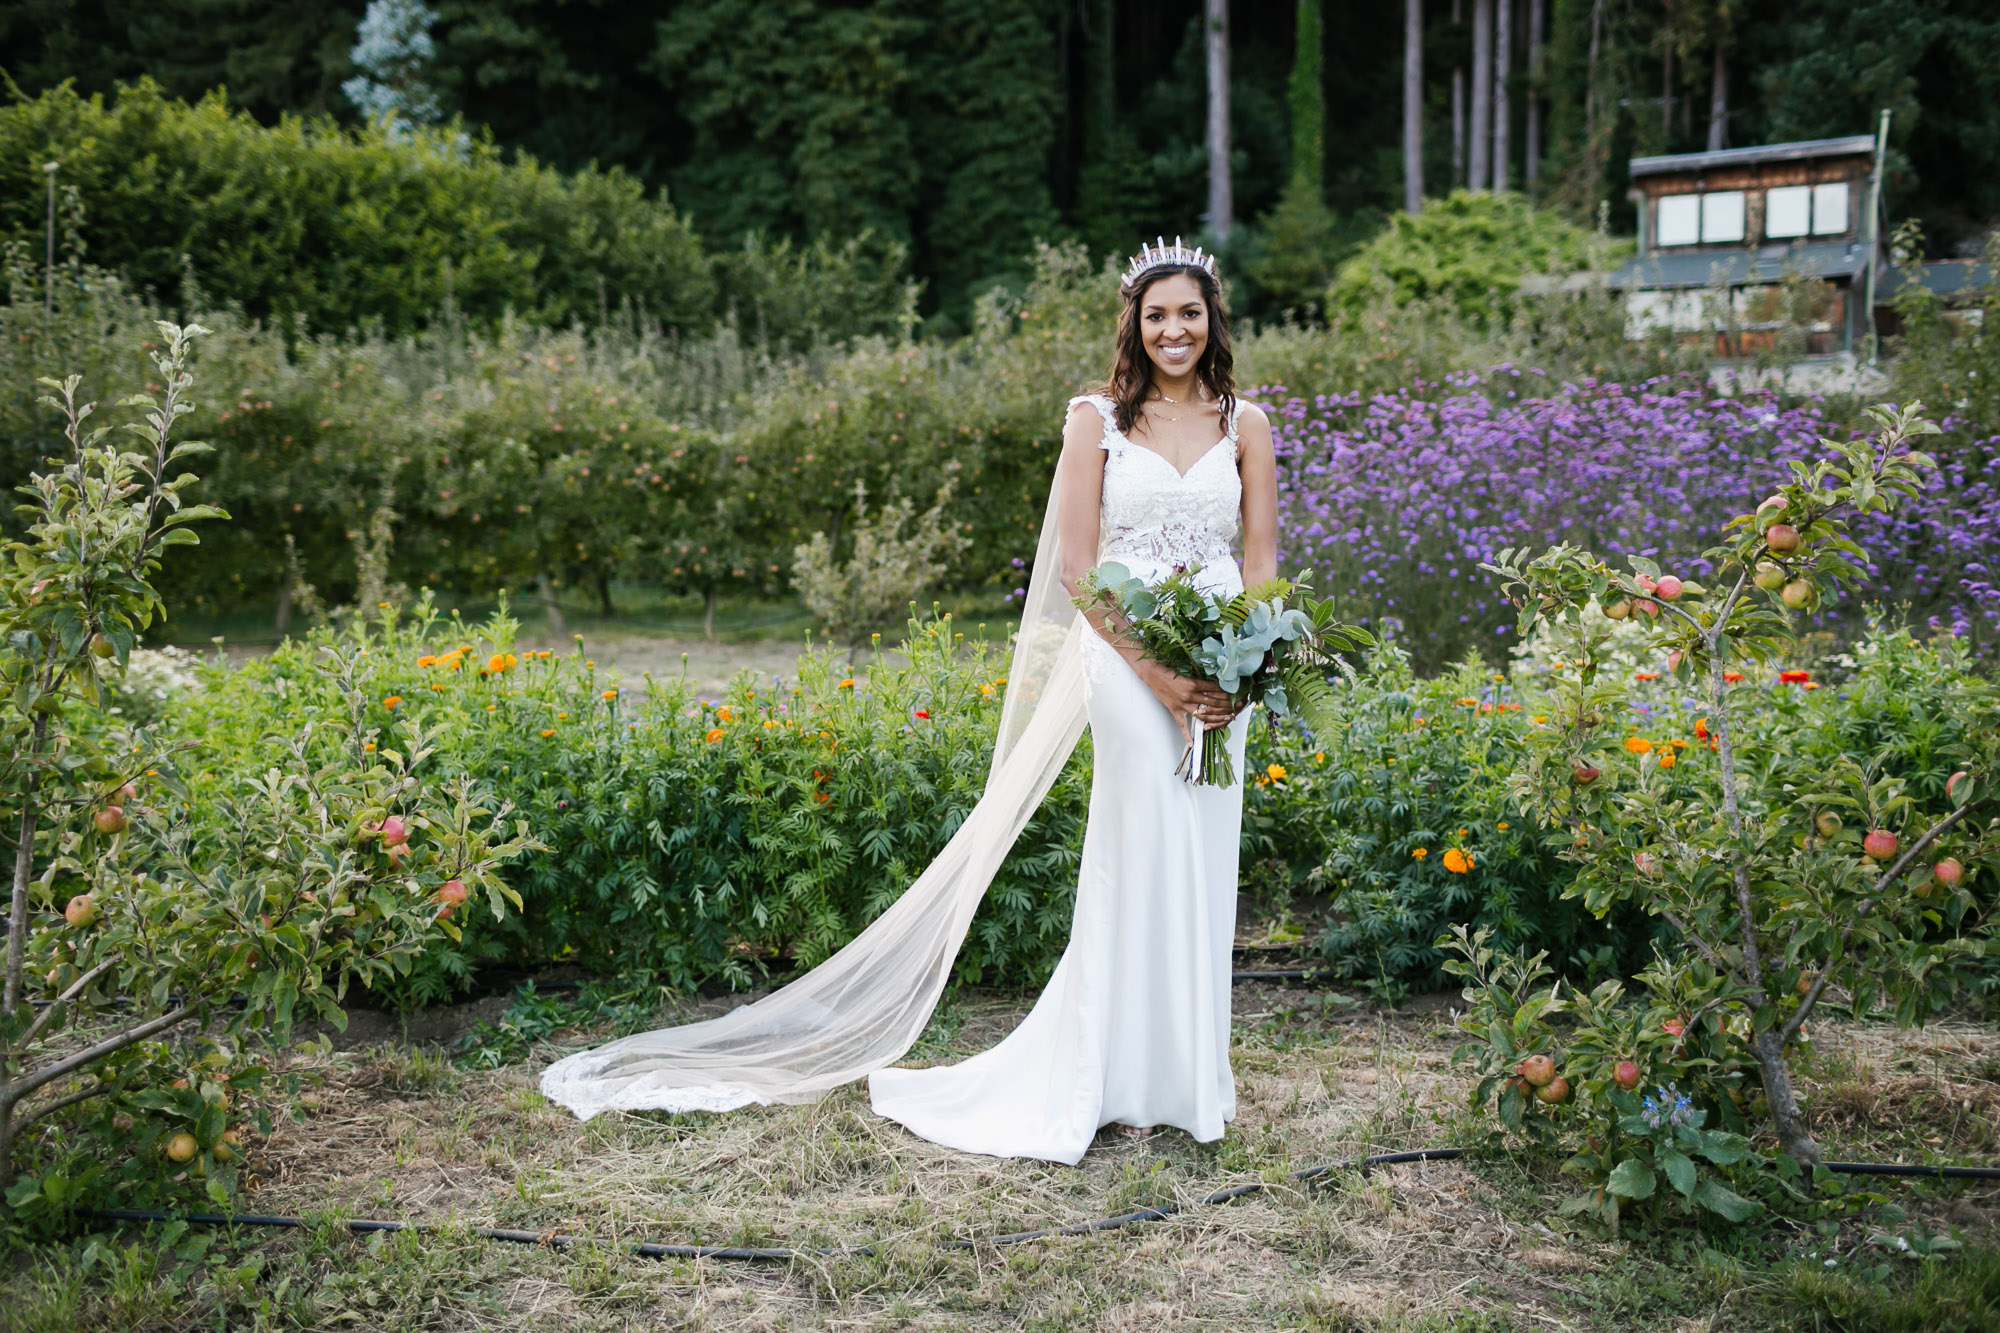 Bride wearing a crystal crown and cape veil stands in flower field and orchard at a California farm wedding venue